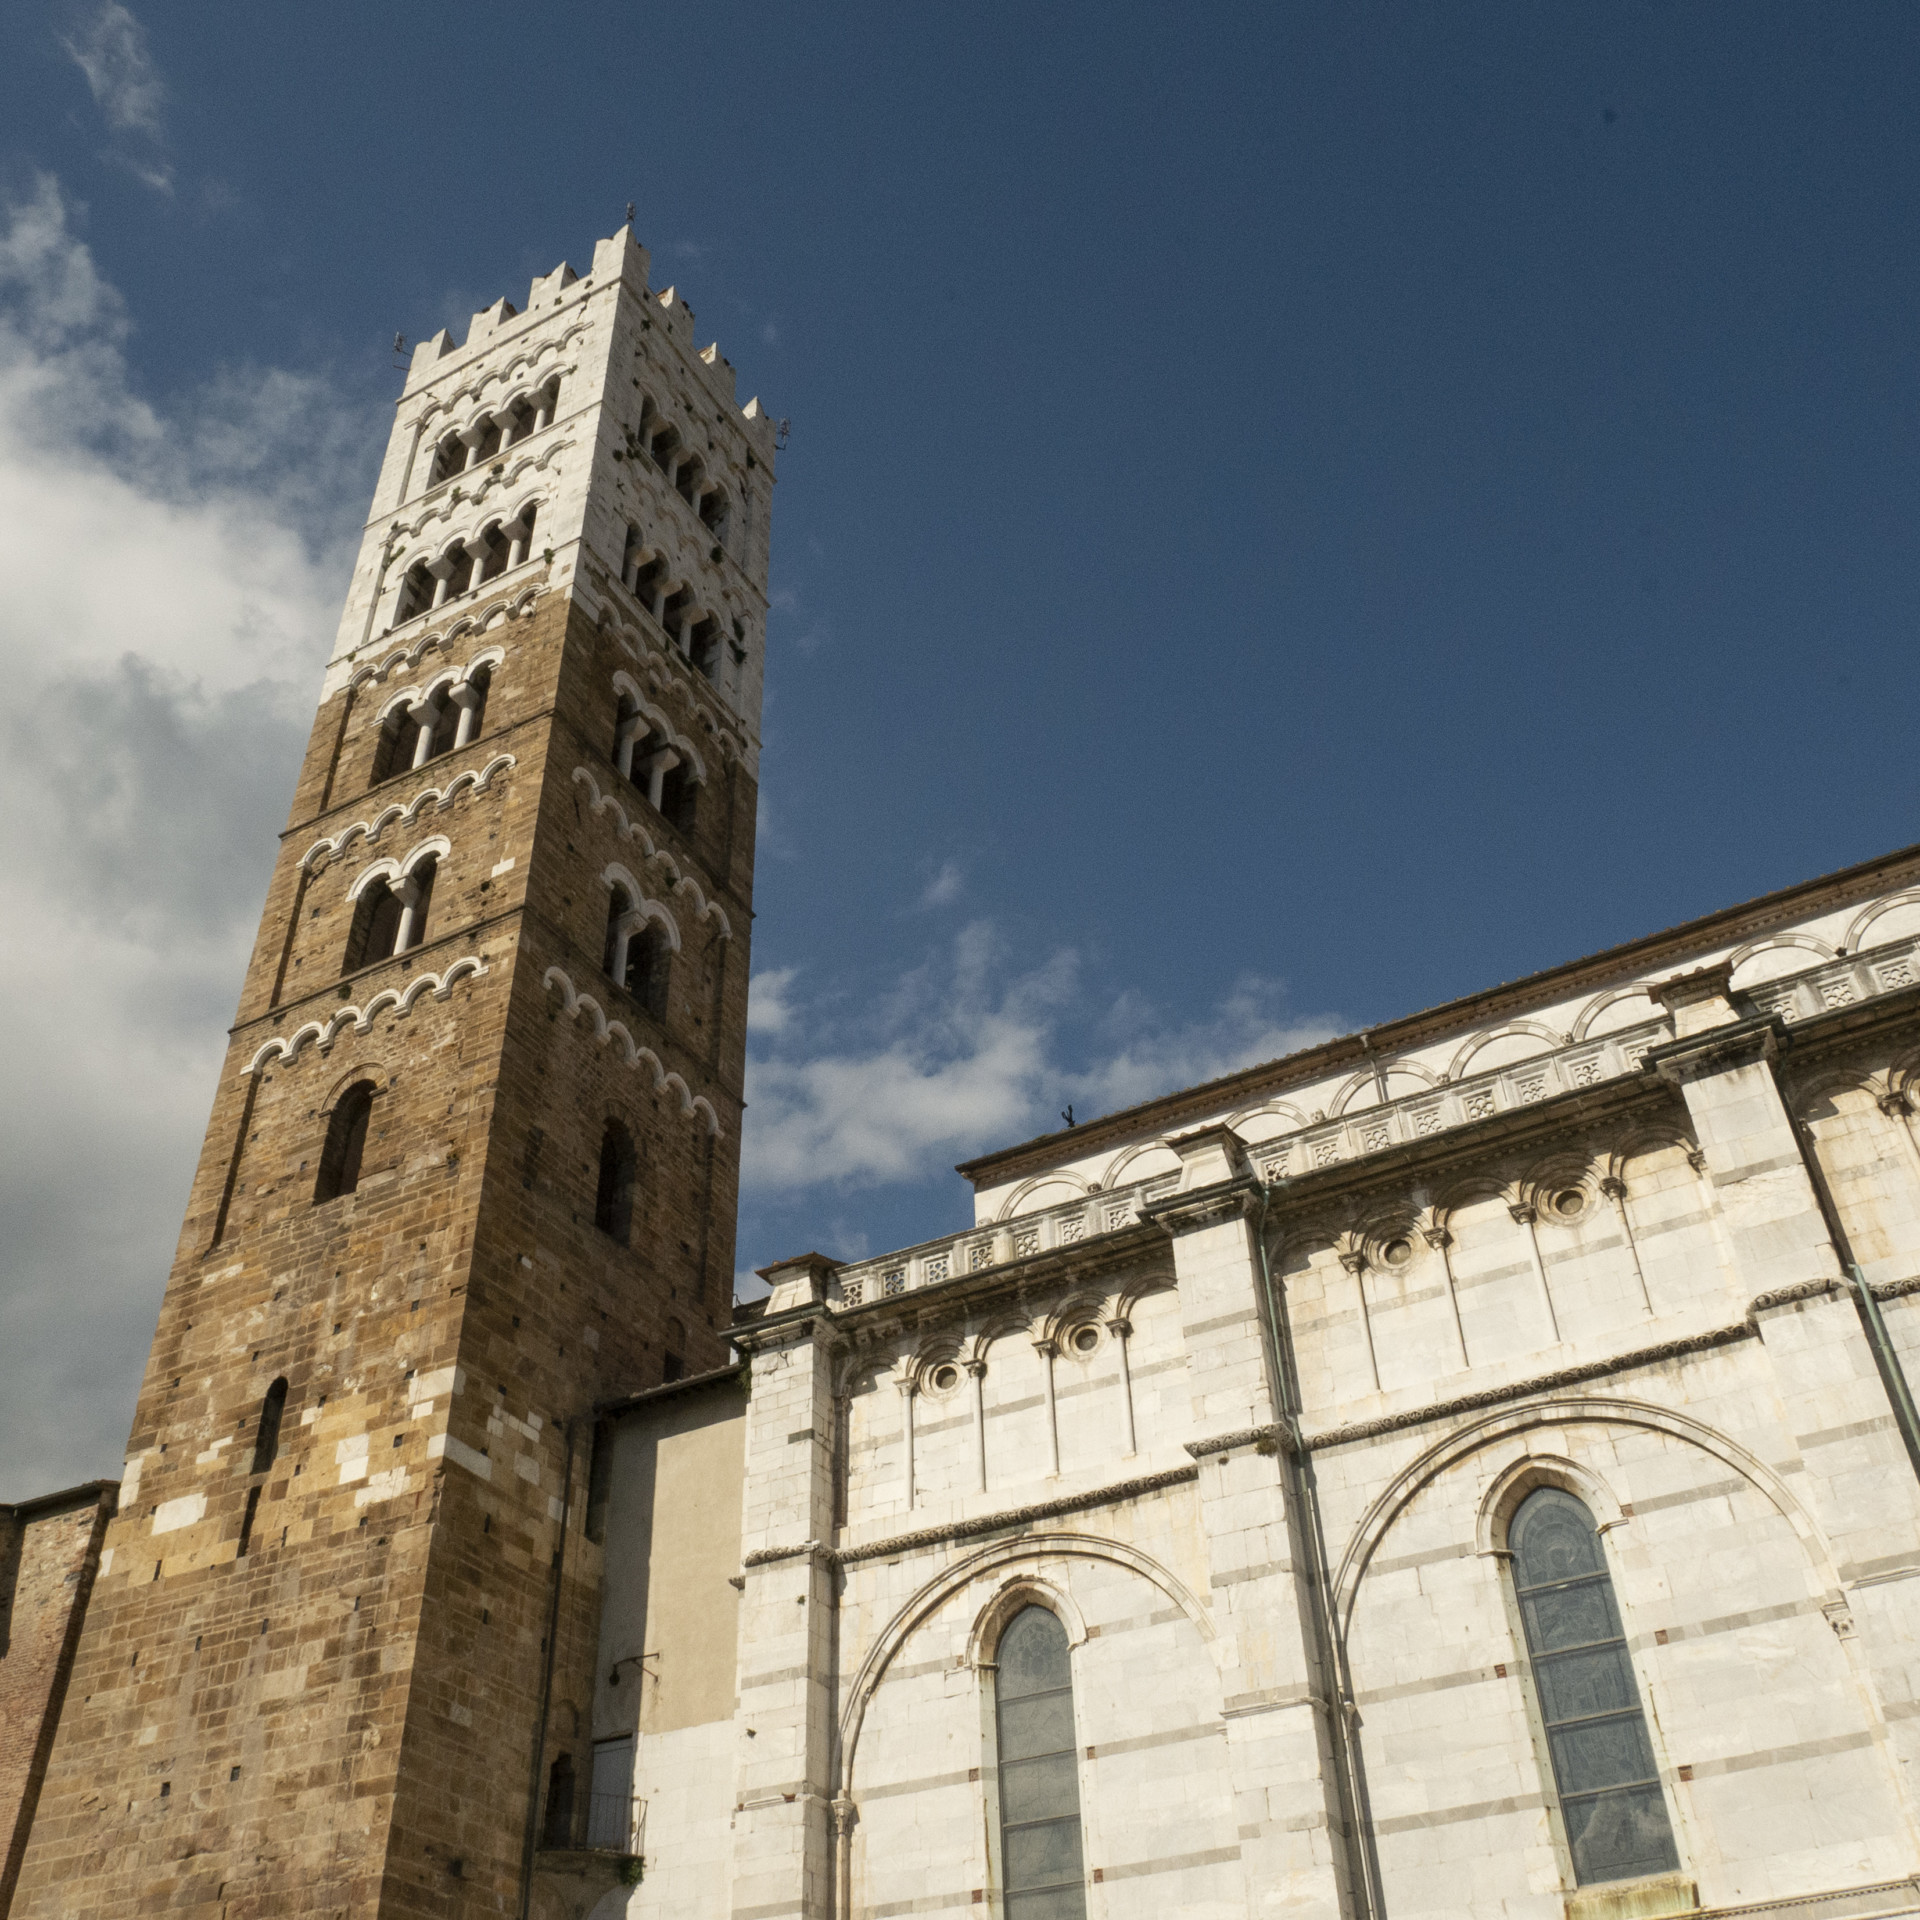 Lucca's imposing towers